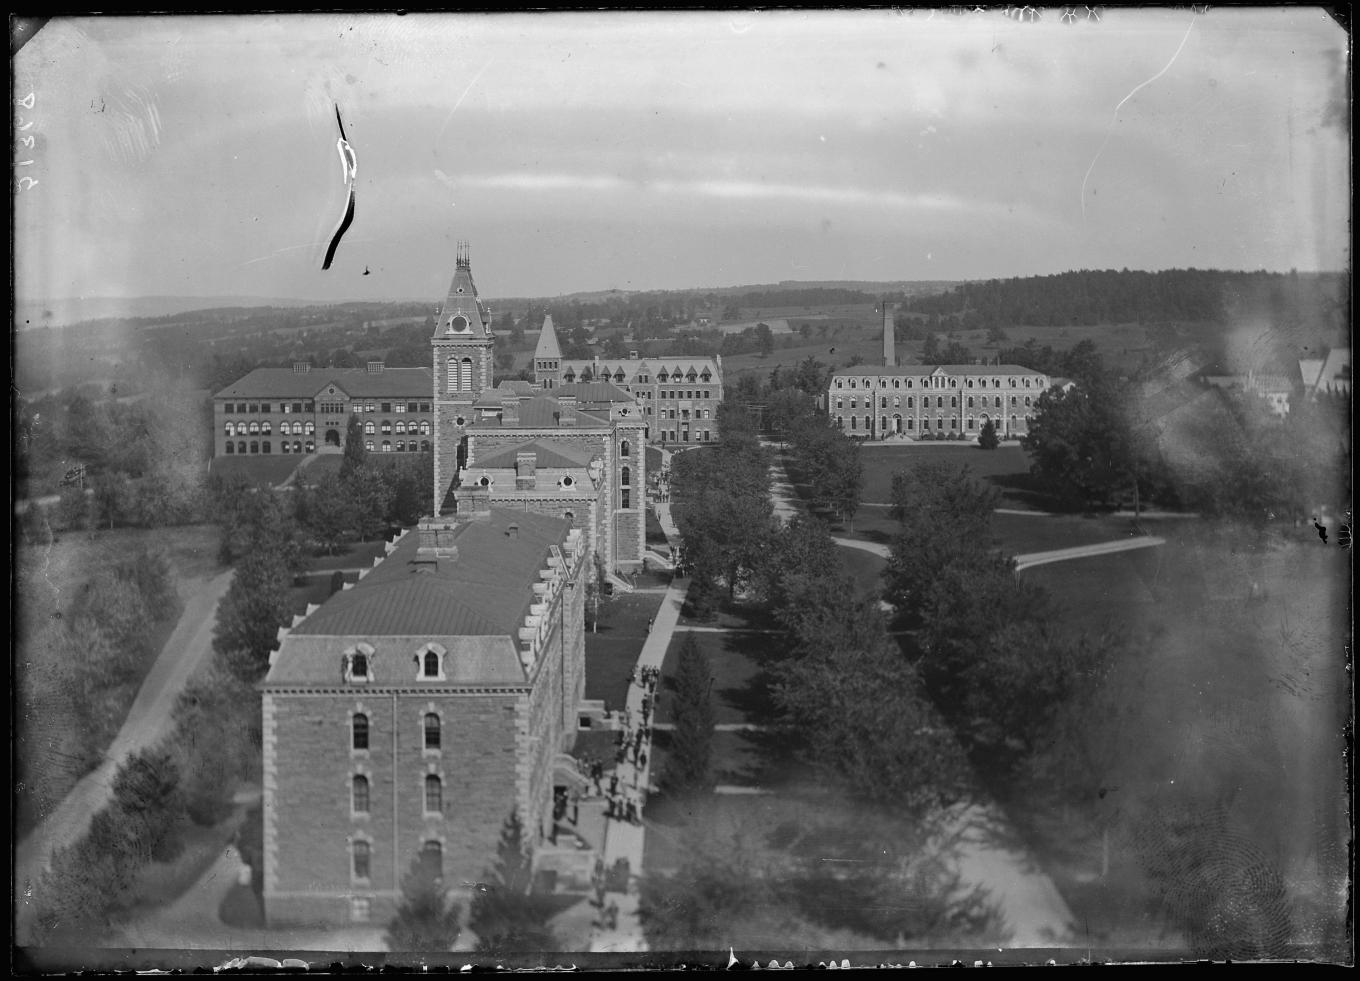 Historical view of the Cornell Campus